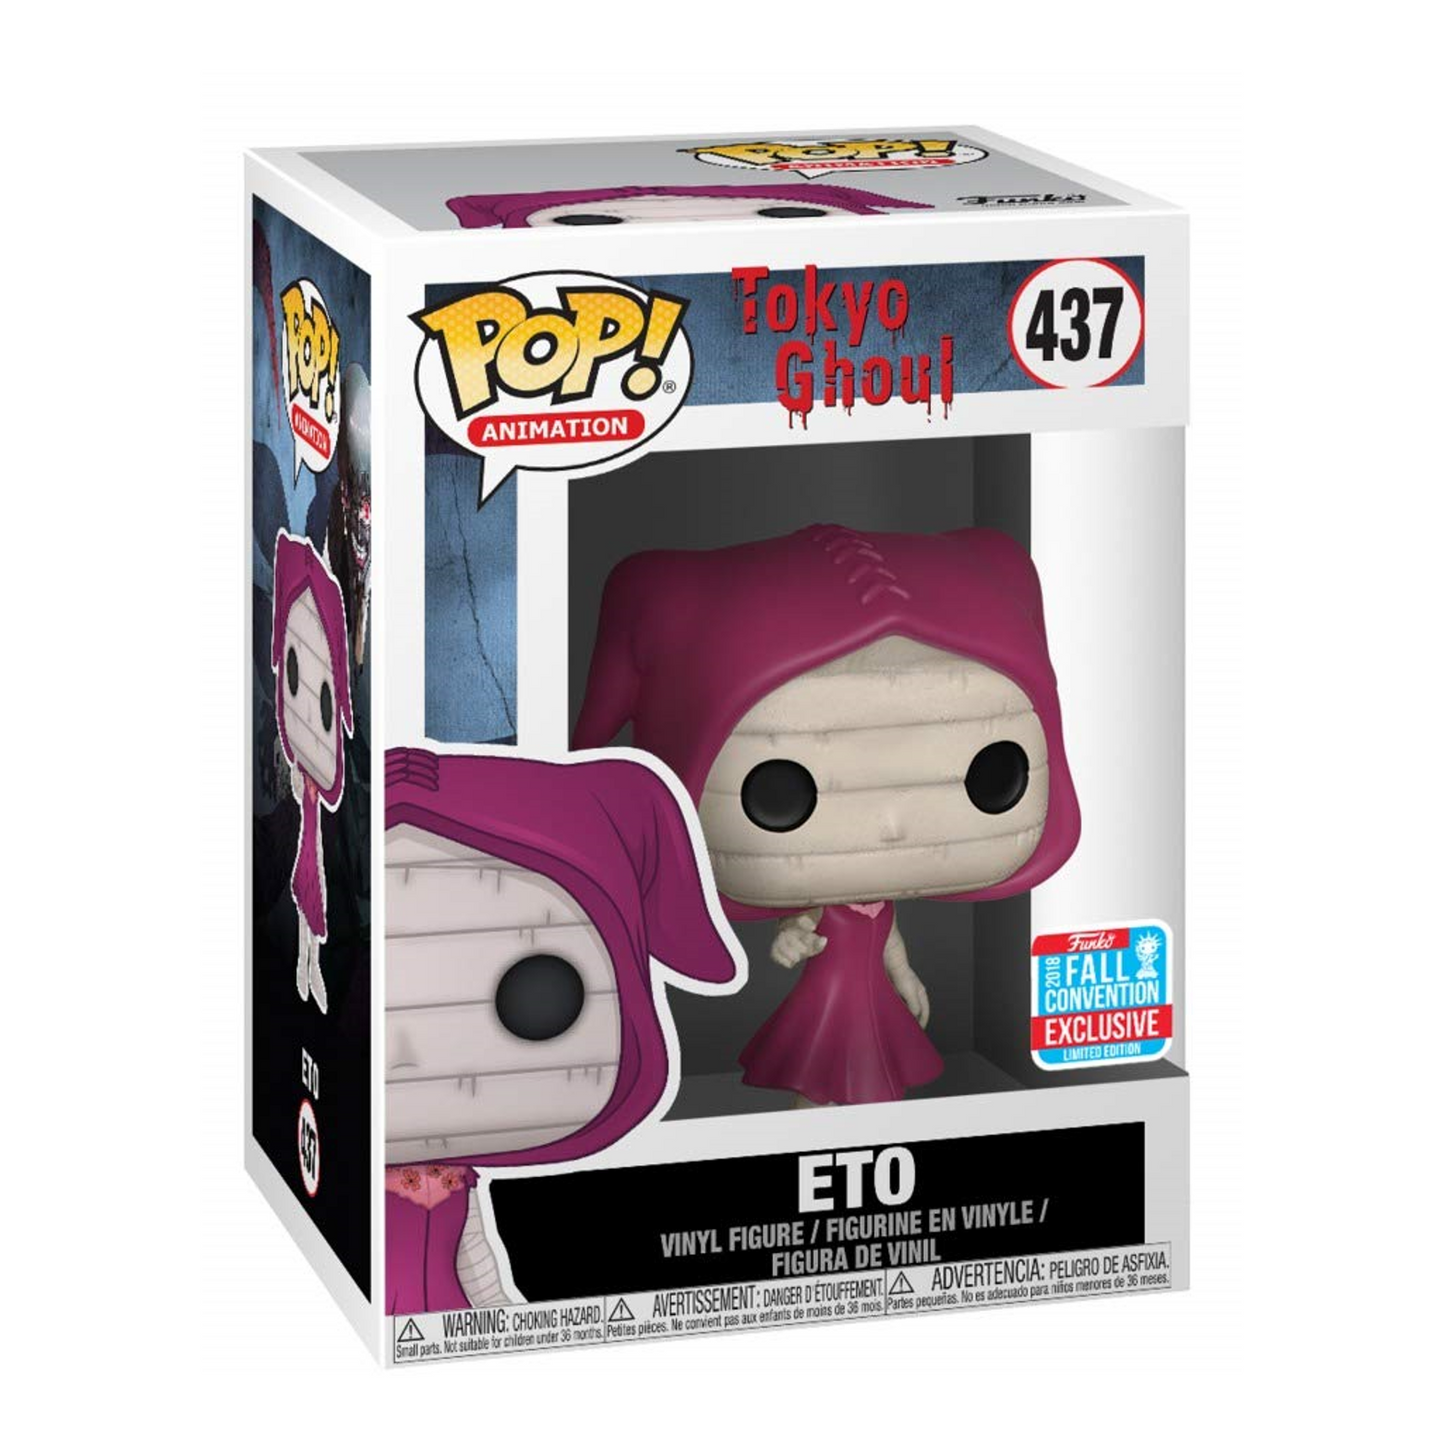 Tokyo Ghoul: Eto (2018 Fall Convention Exclusive) Funko POP!